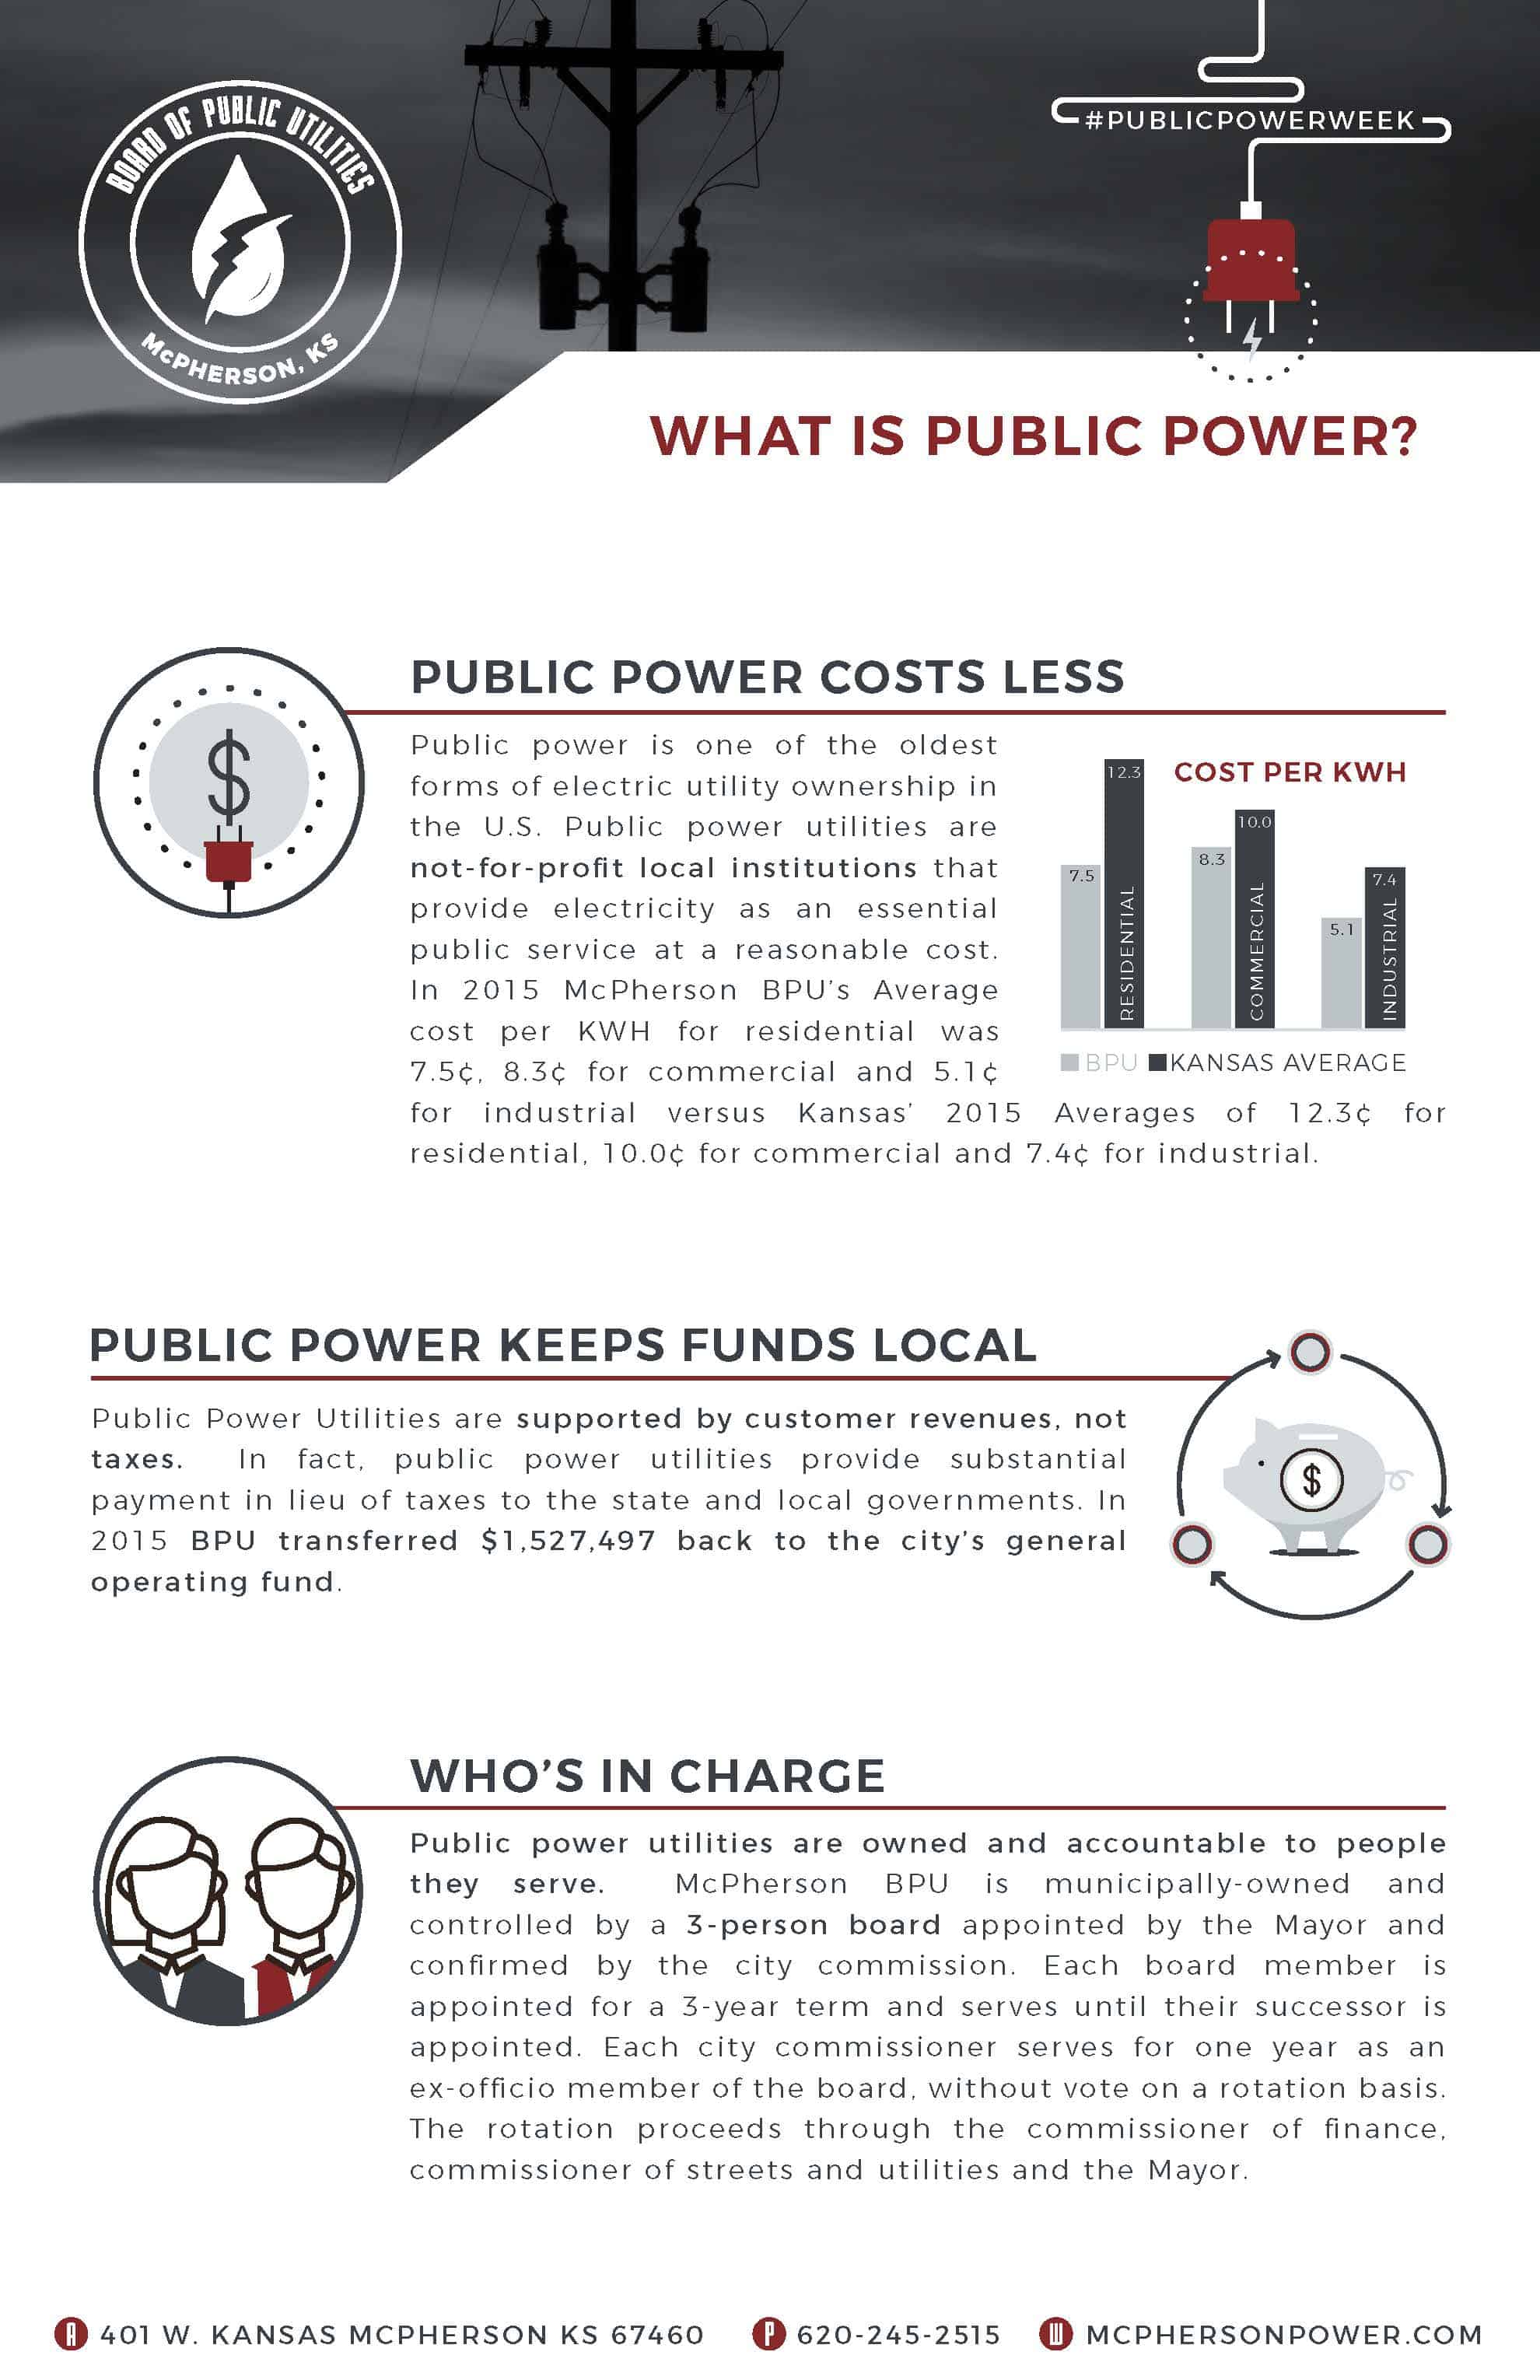 What is Public Power?